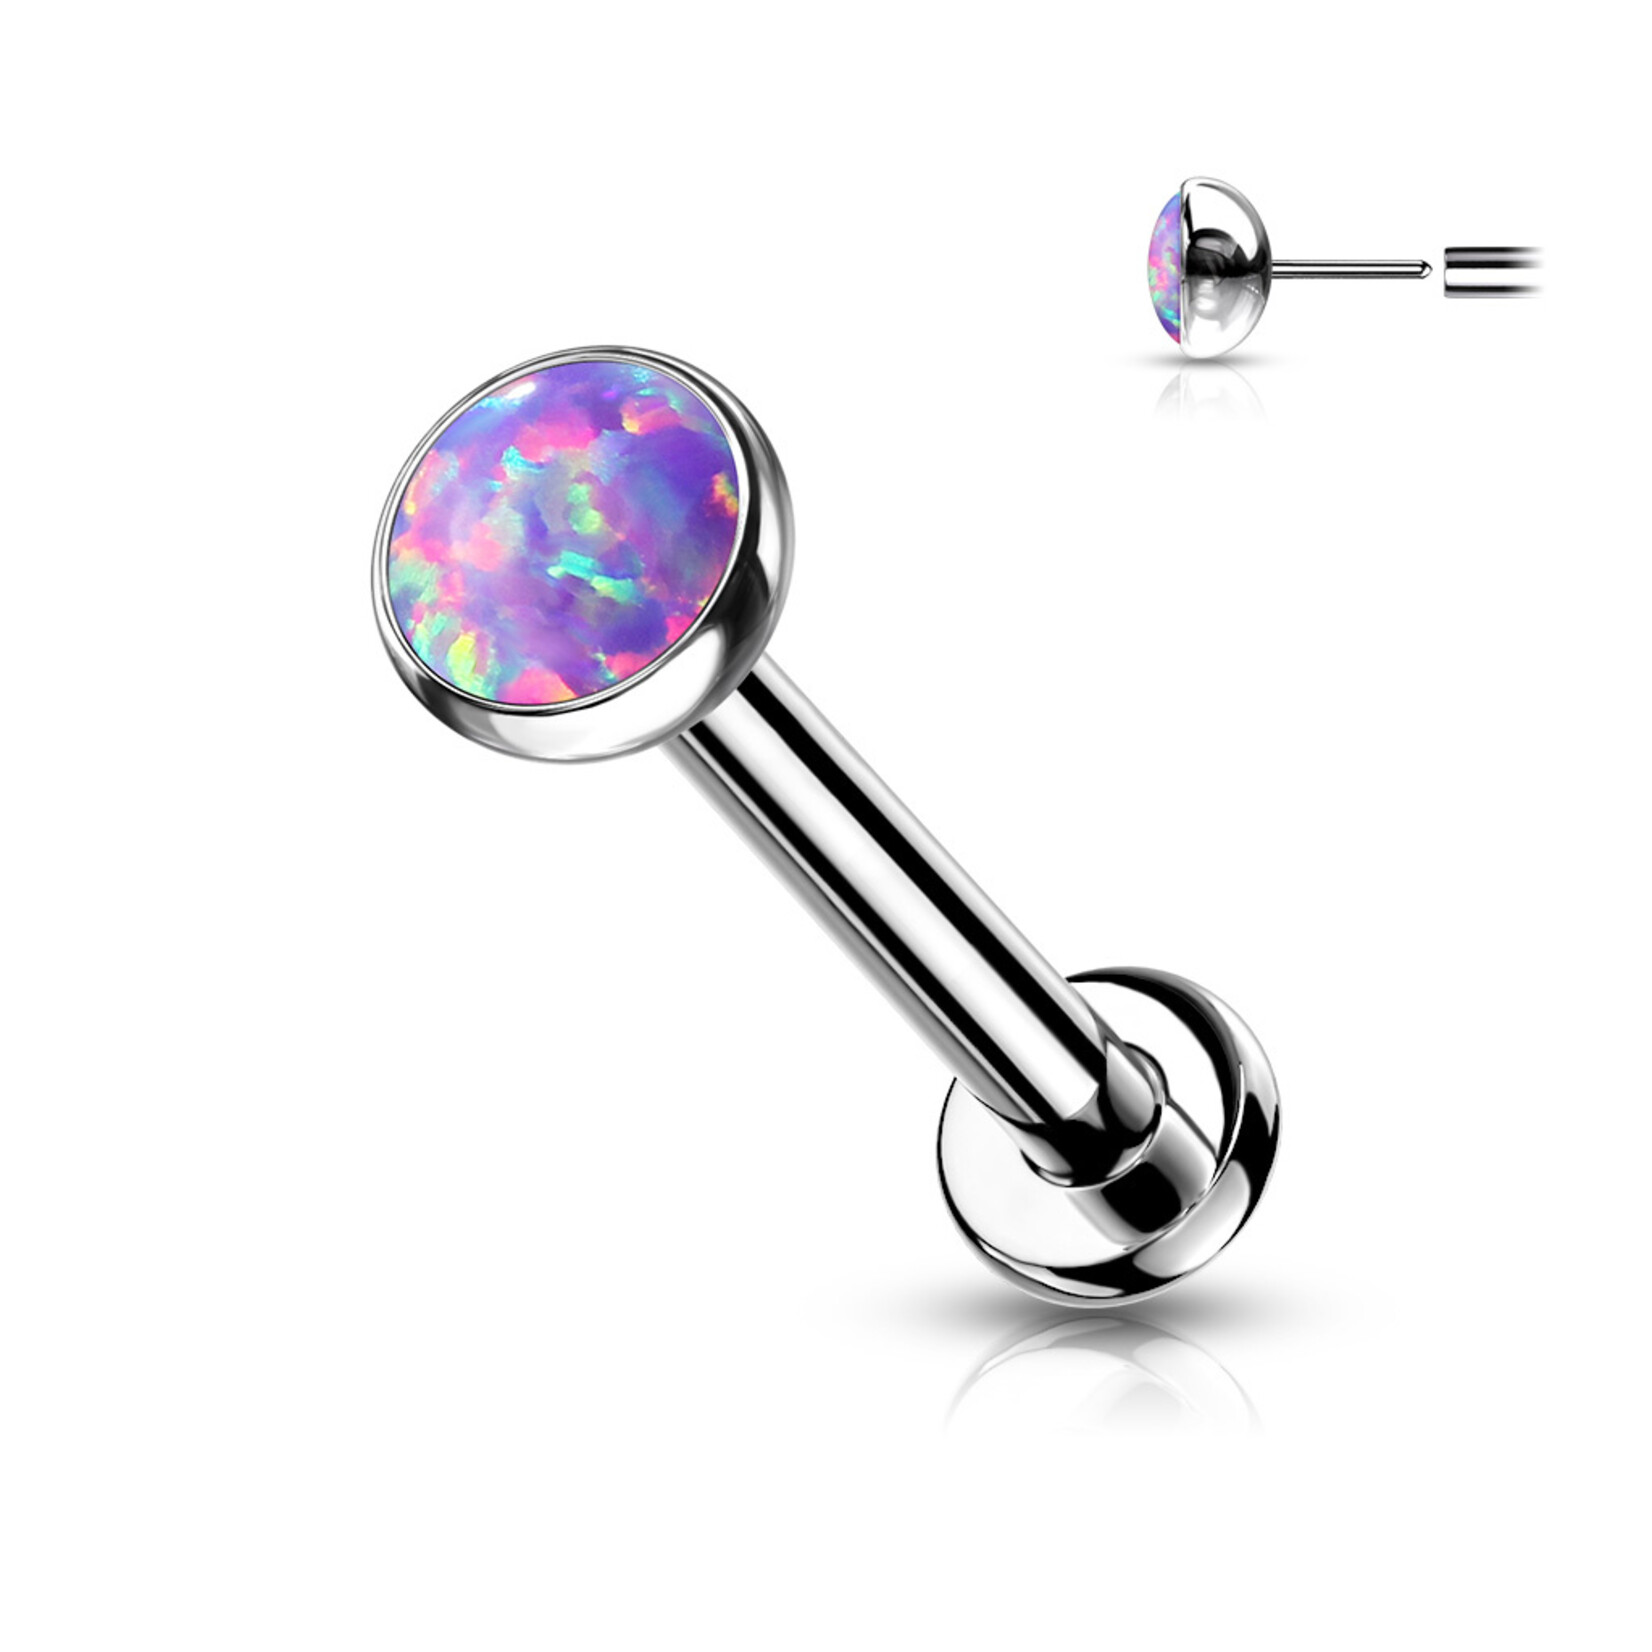 Hollywood Body Jewelry Opal Labret